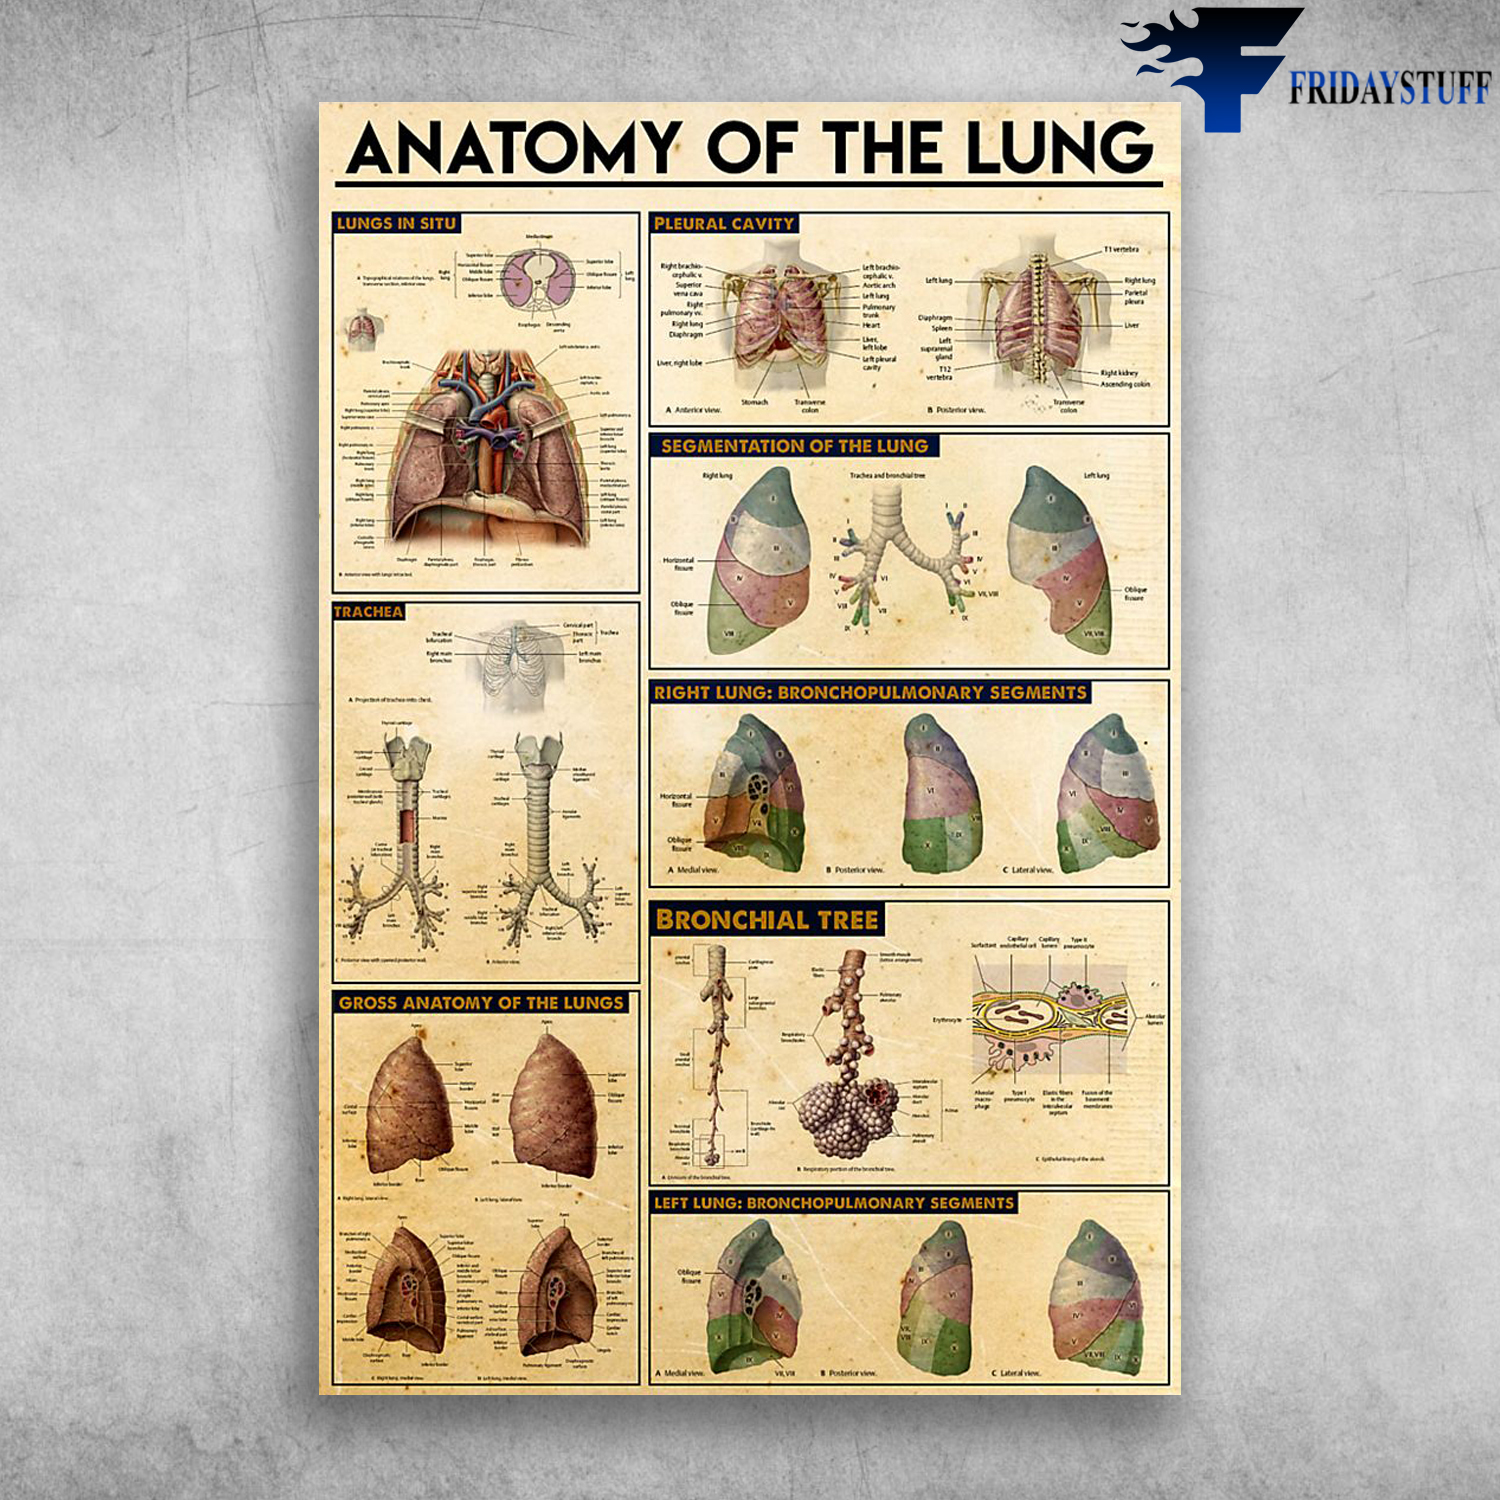 Anatomy Of The Lung Segmentation Of The Lung